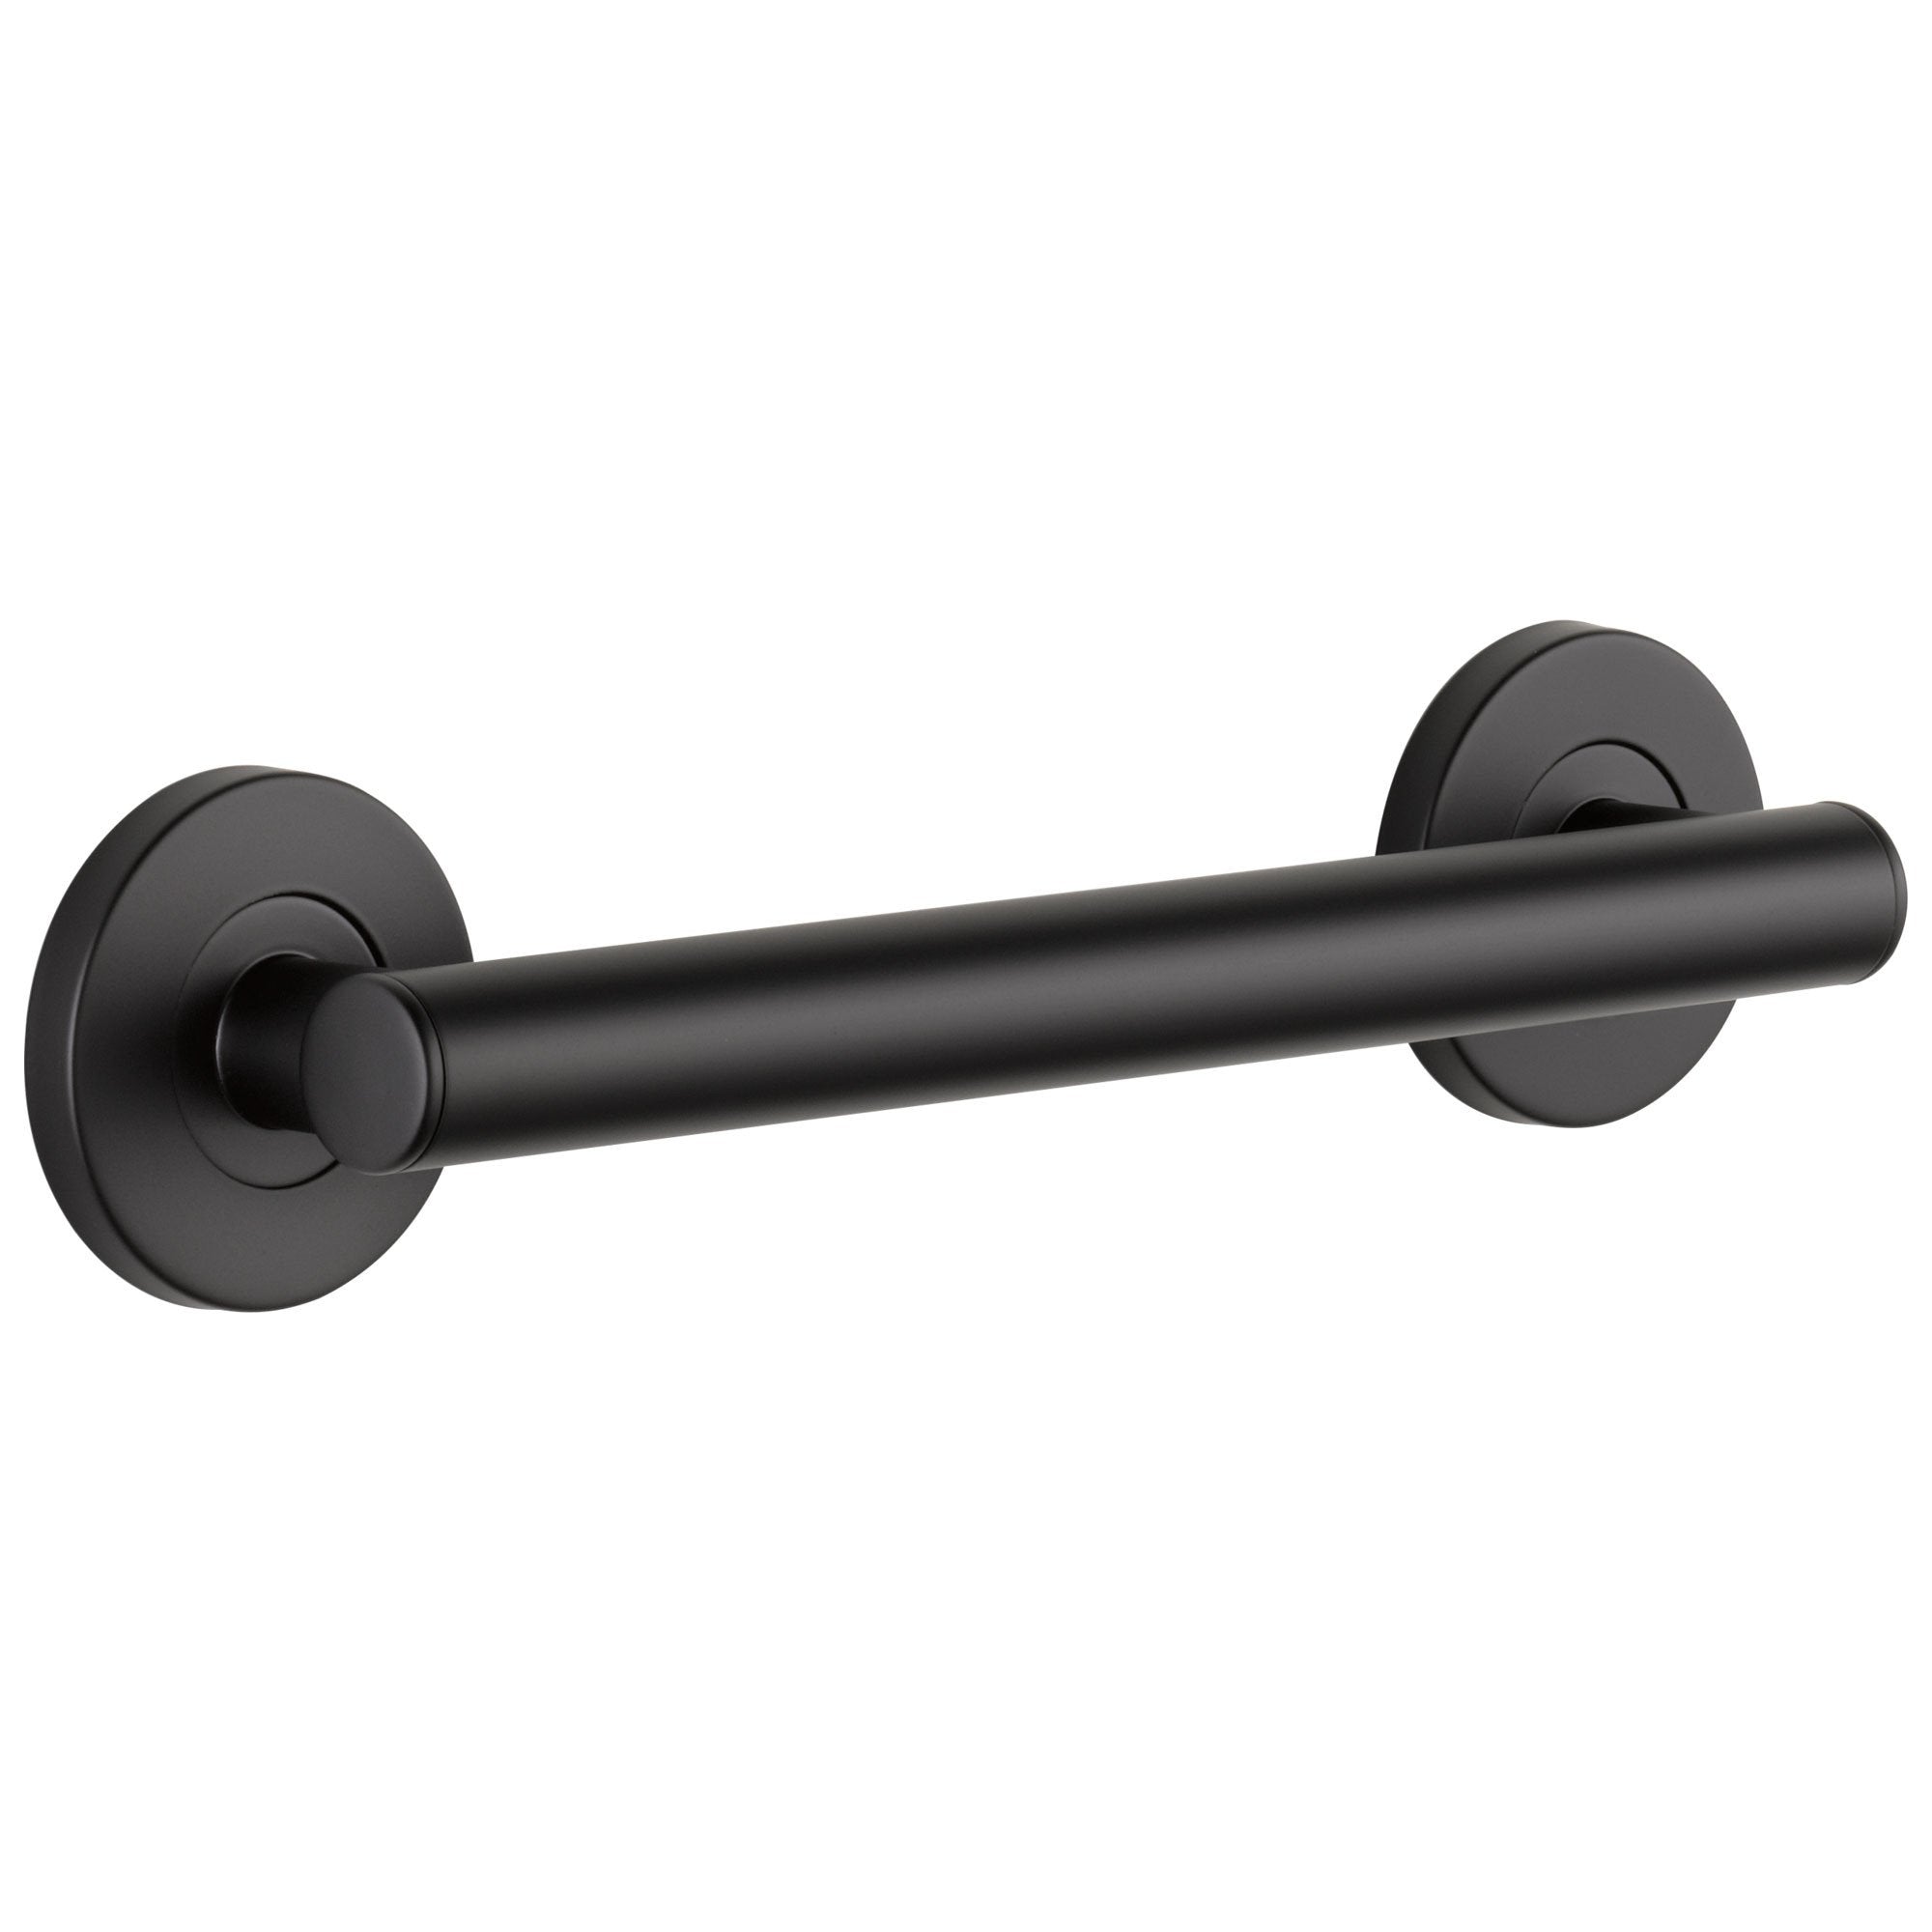 Delta Bath Safety Collection Matte Black Finish Contemporary Wall Mounted Decorative Bathroom ADA Approved Short 12" Grab Bar D41812BL